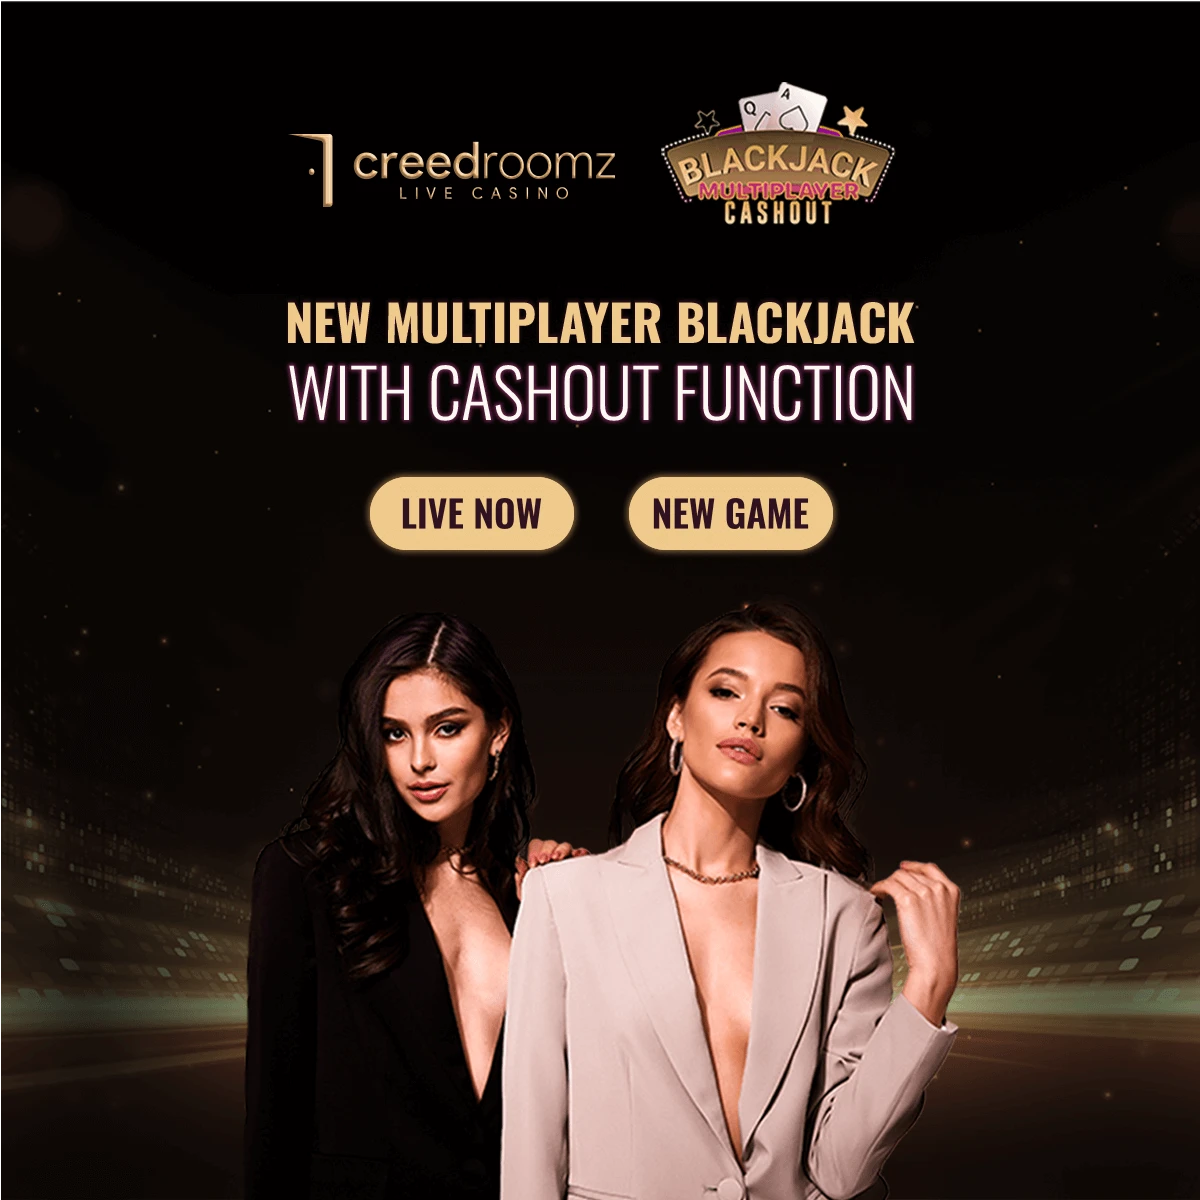 7373-the-first-multiplayer-blackjack-by-creedroomz-is-now-live-with-cash-out-function-16806232090658.png